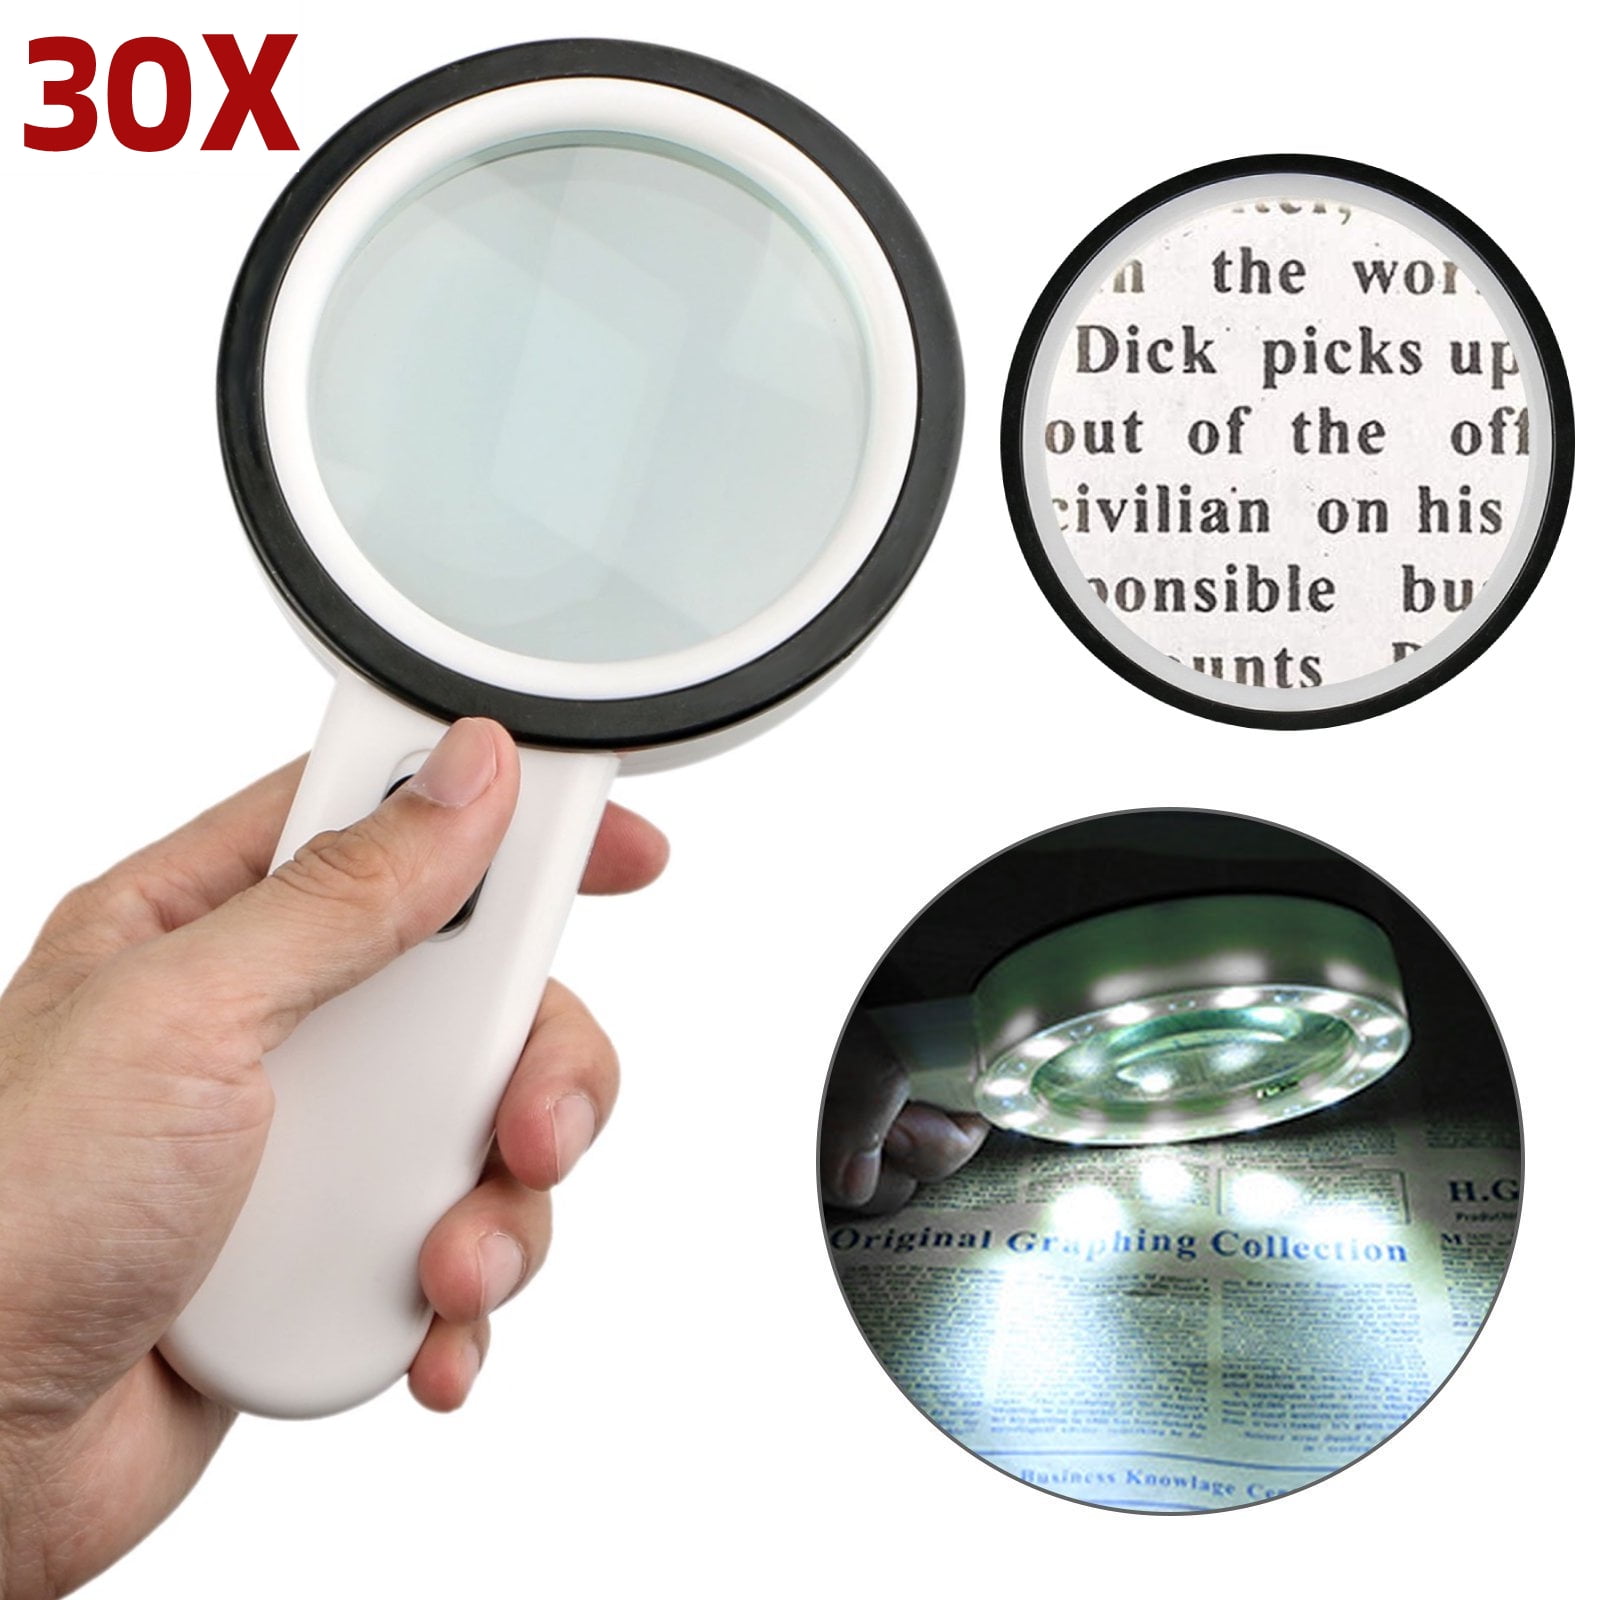 Magnifying Glass with Light and Stand 5 Times The HD Portable Handheld Reading Magnifier loupe Magnifier Glass Eye Glass Lens Magnifying Glass to Read Tool Magnifier for Reading